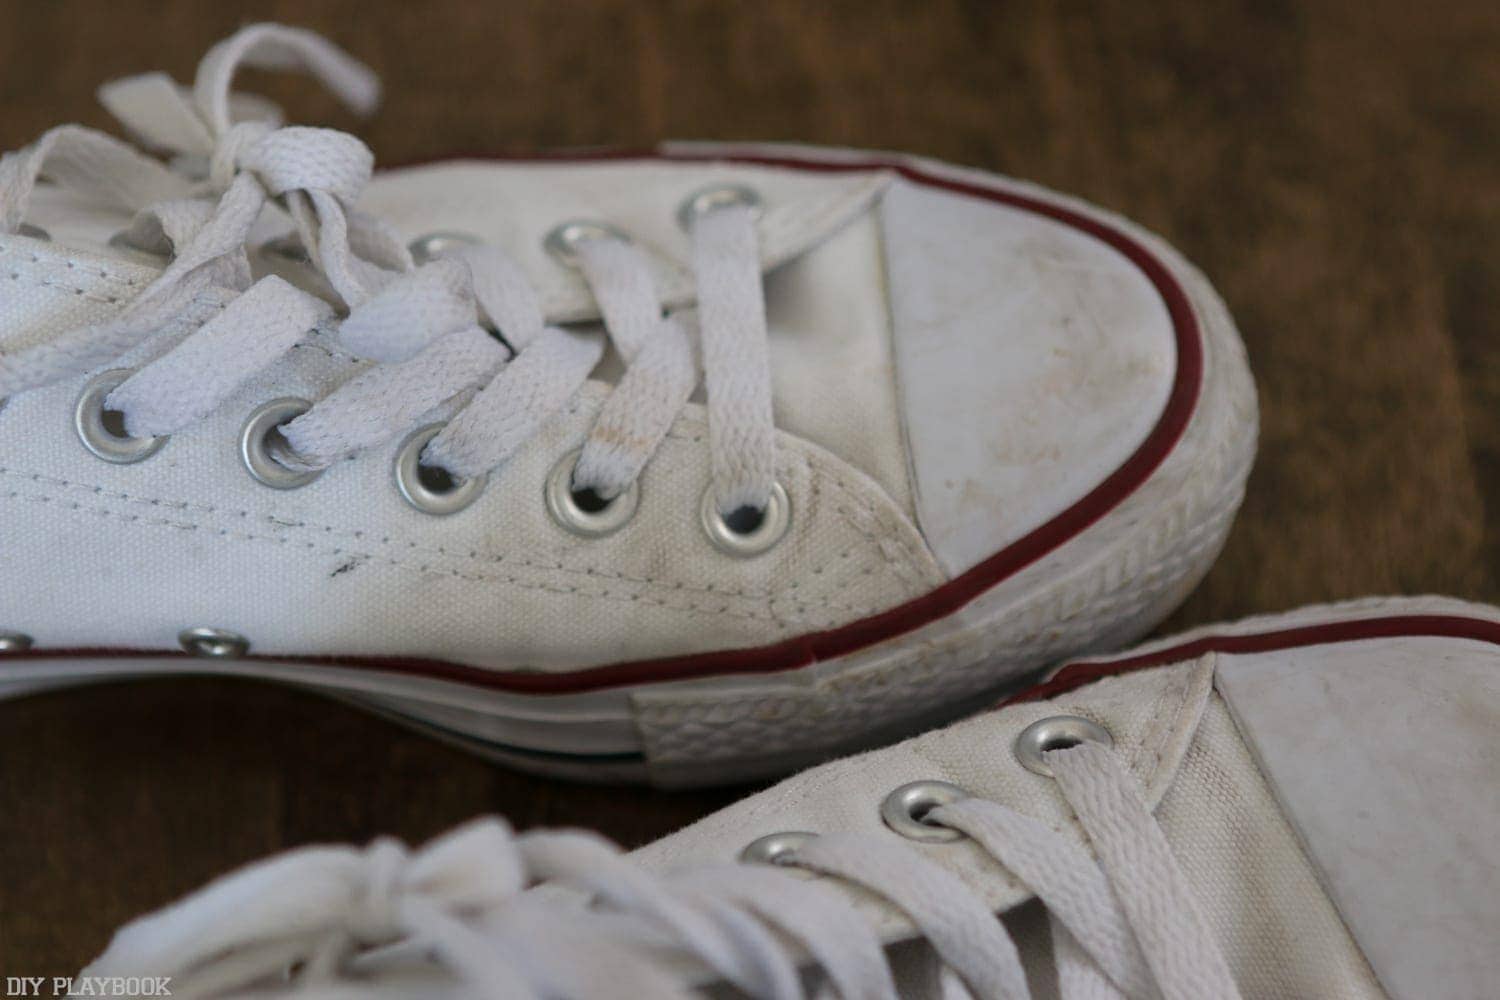 How_to_clean_Converse_Gymshoes